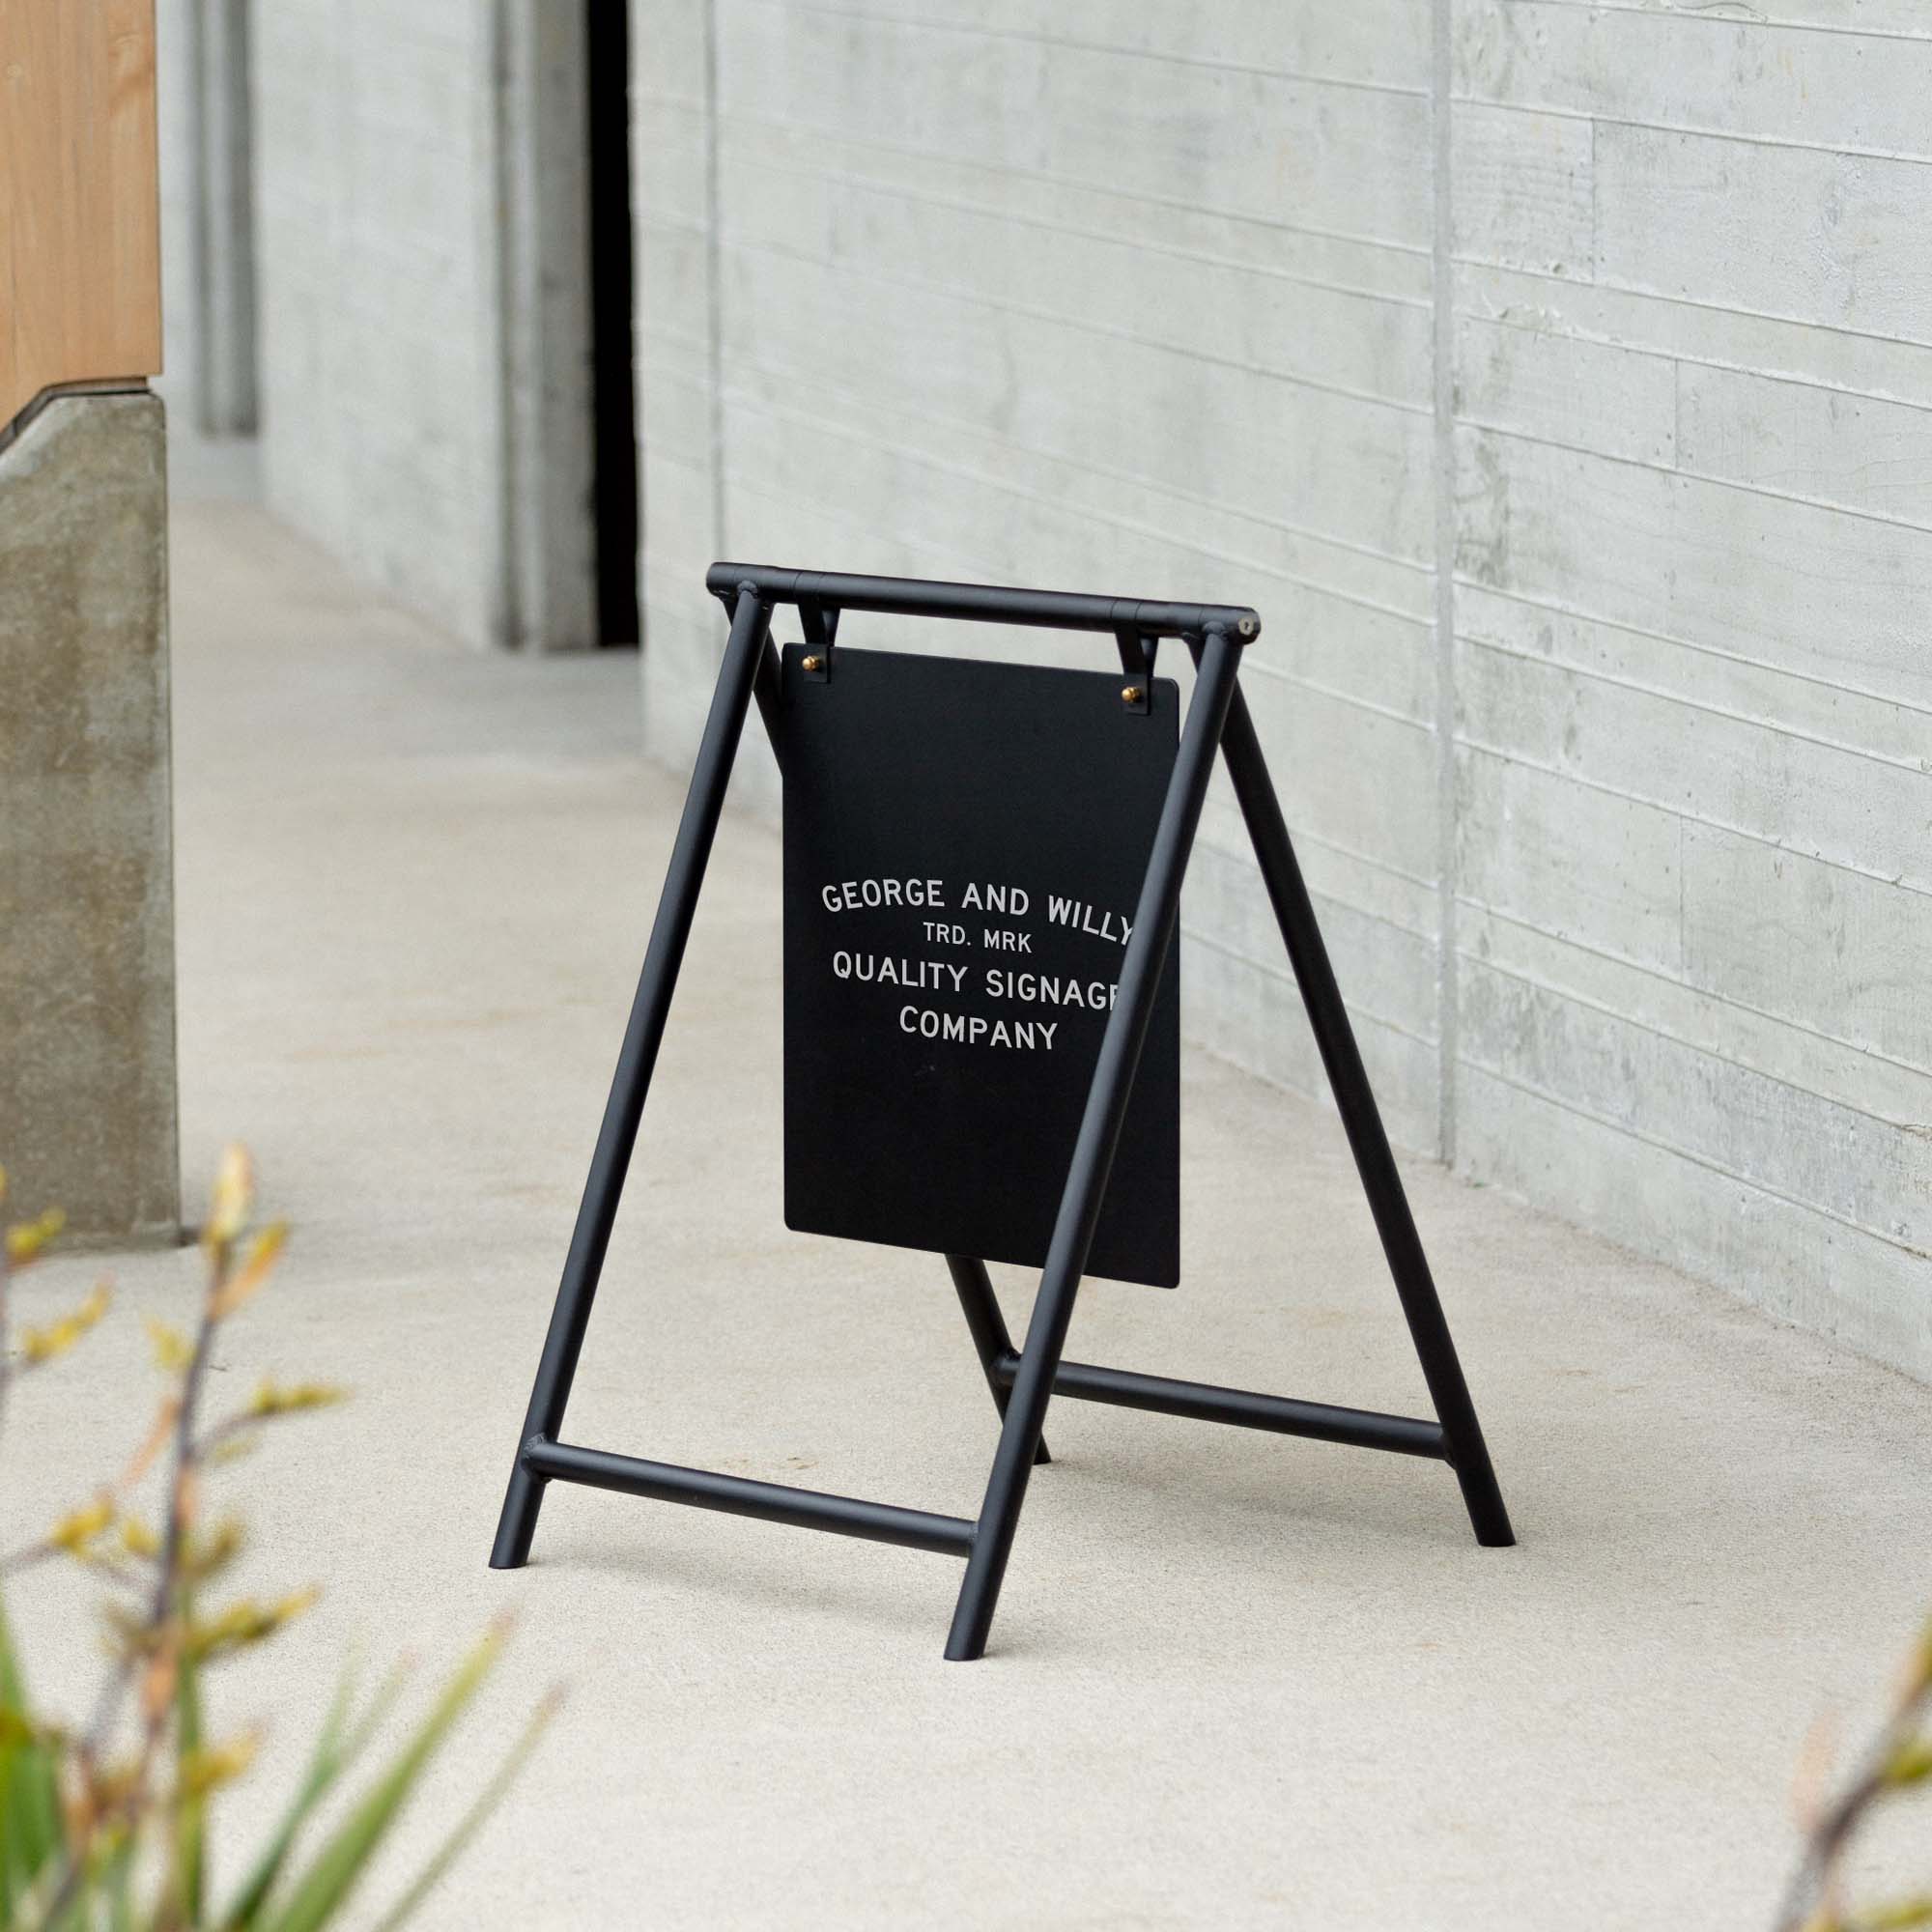 How to Install the A-Frame Sign